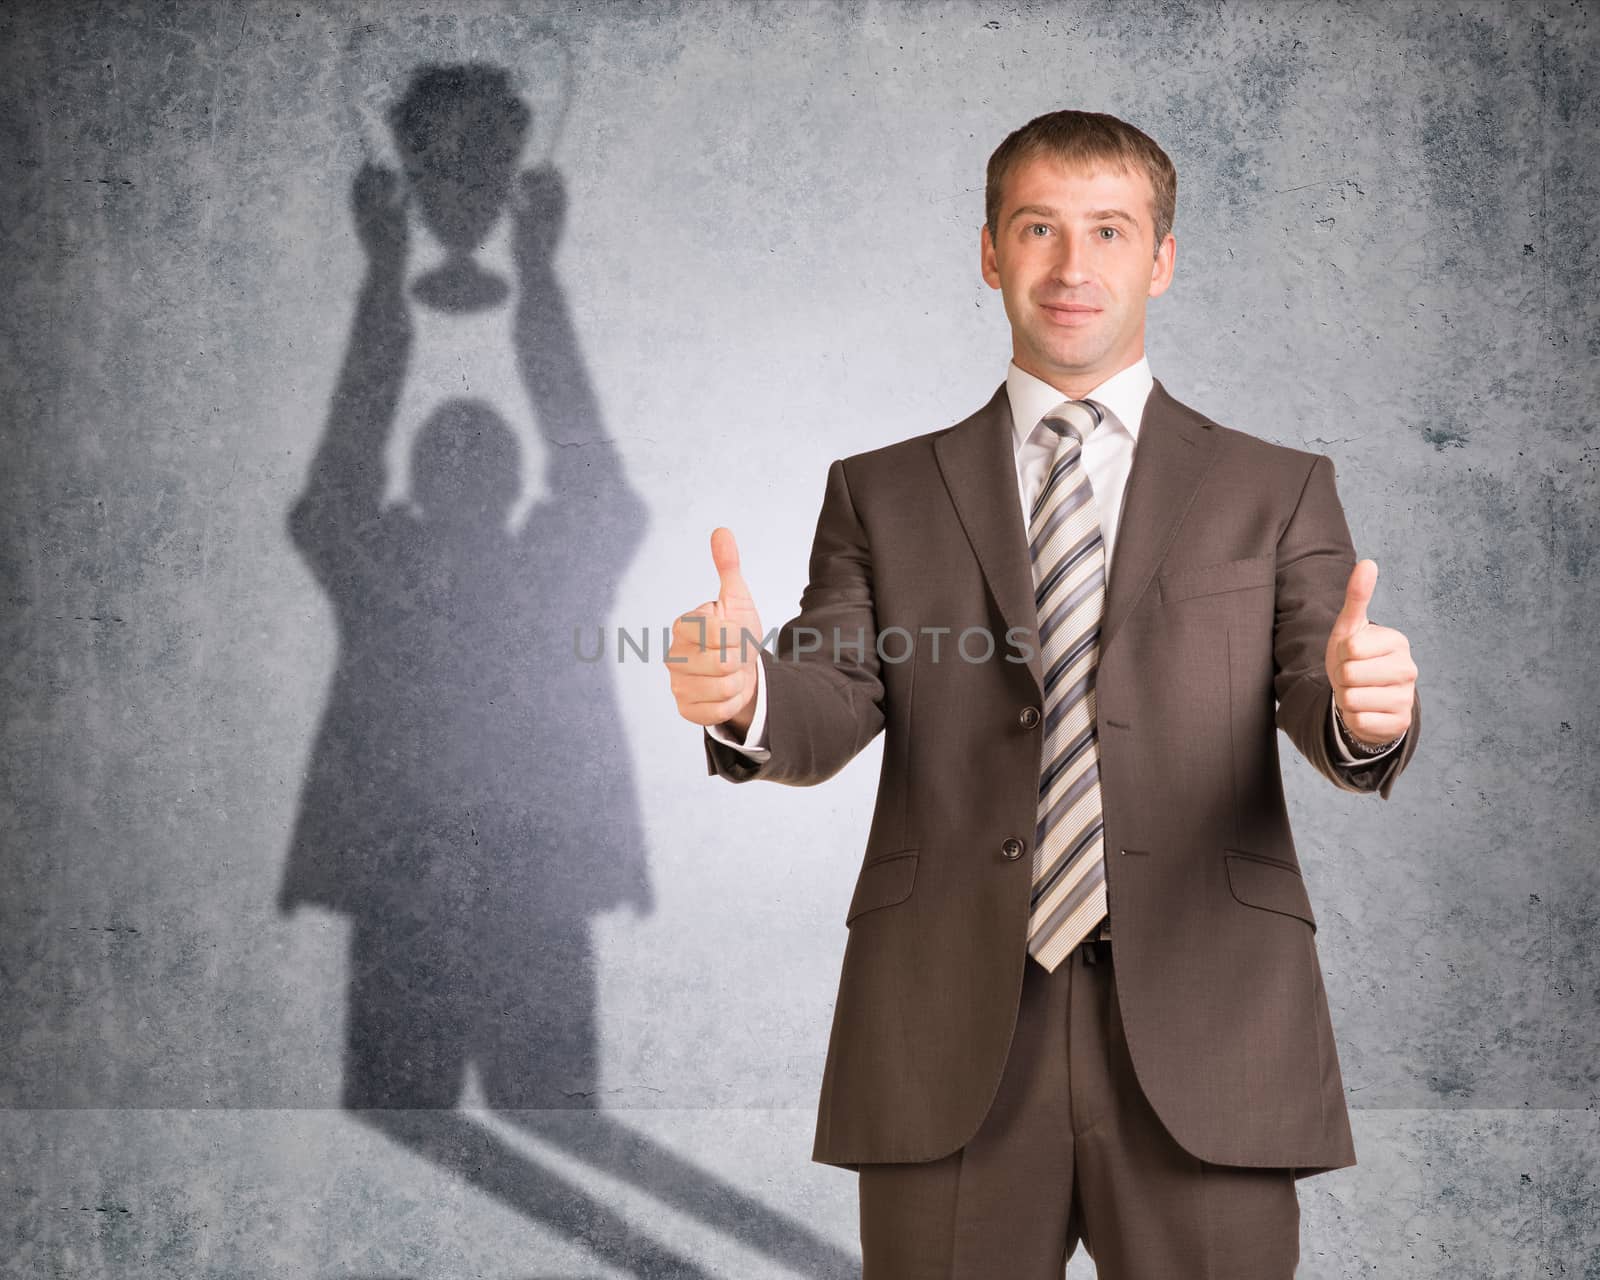 Businessman with shadow holding winner cup on wall texture background, looking at camera